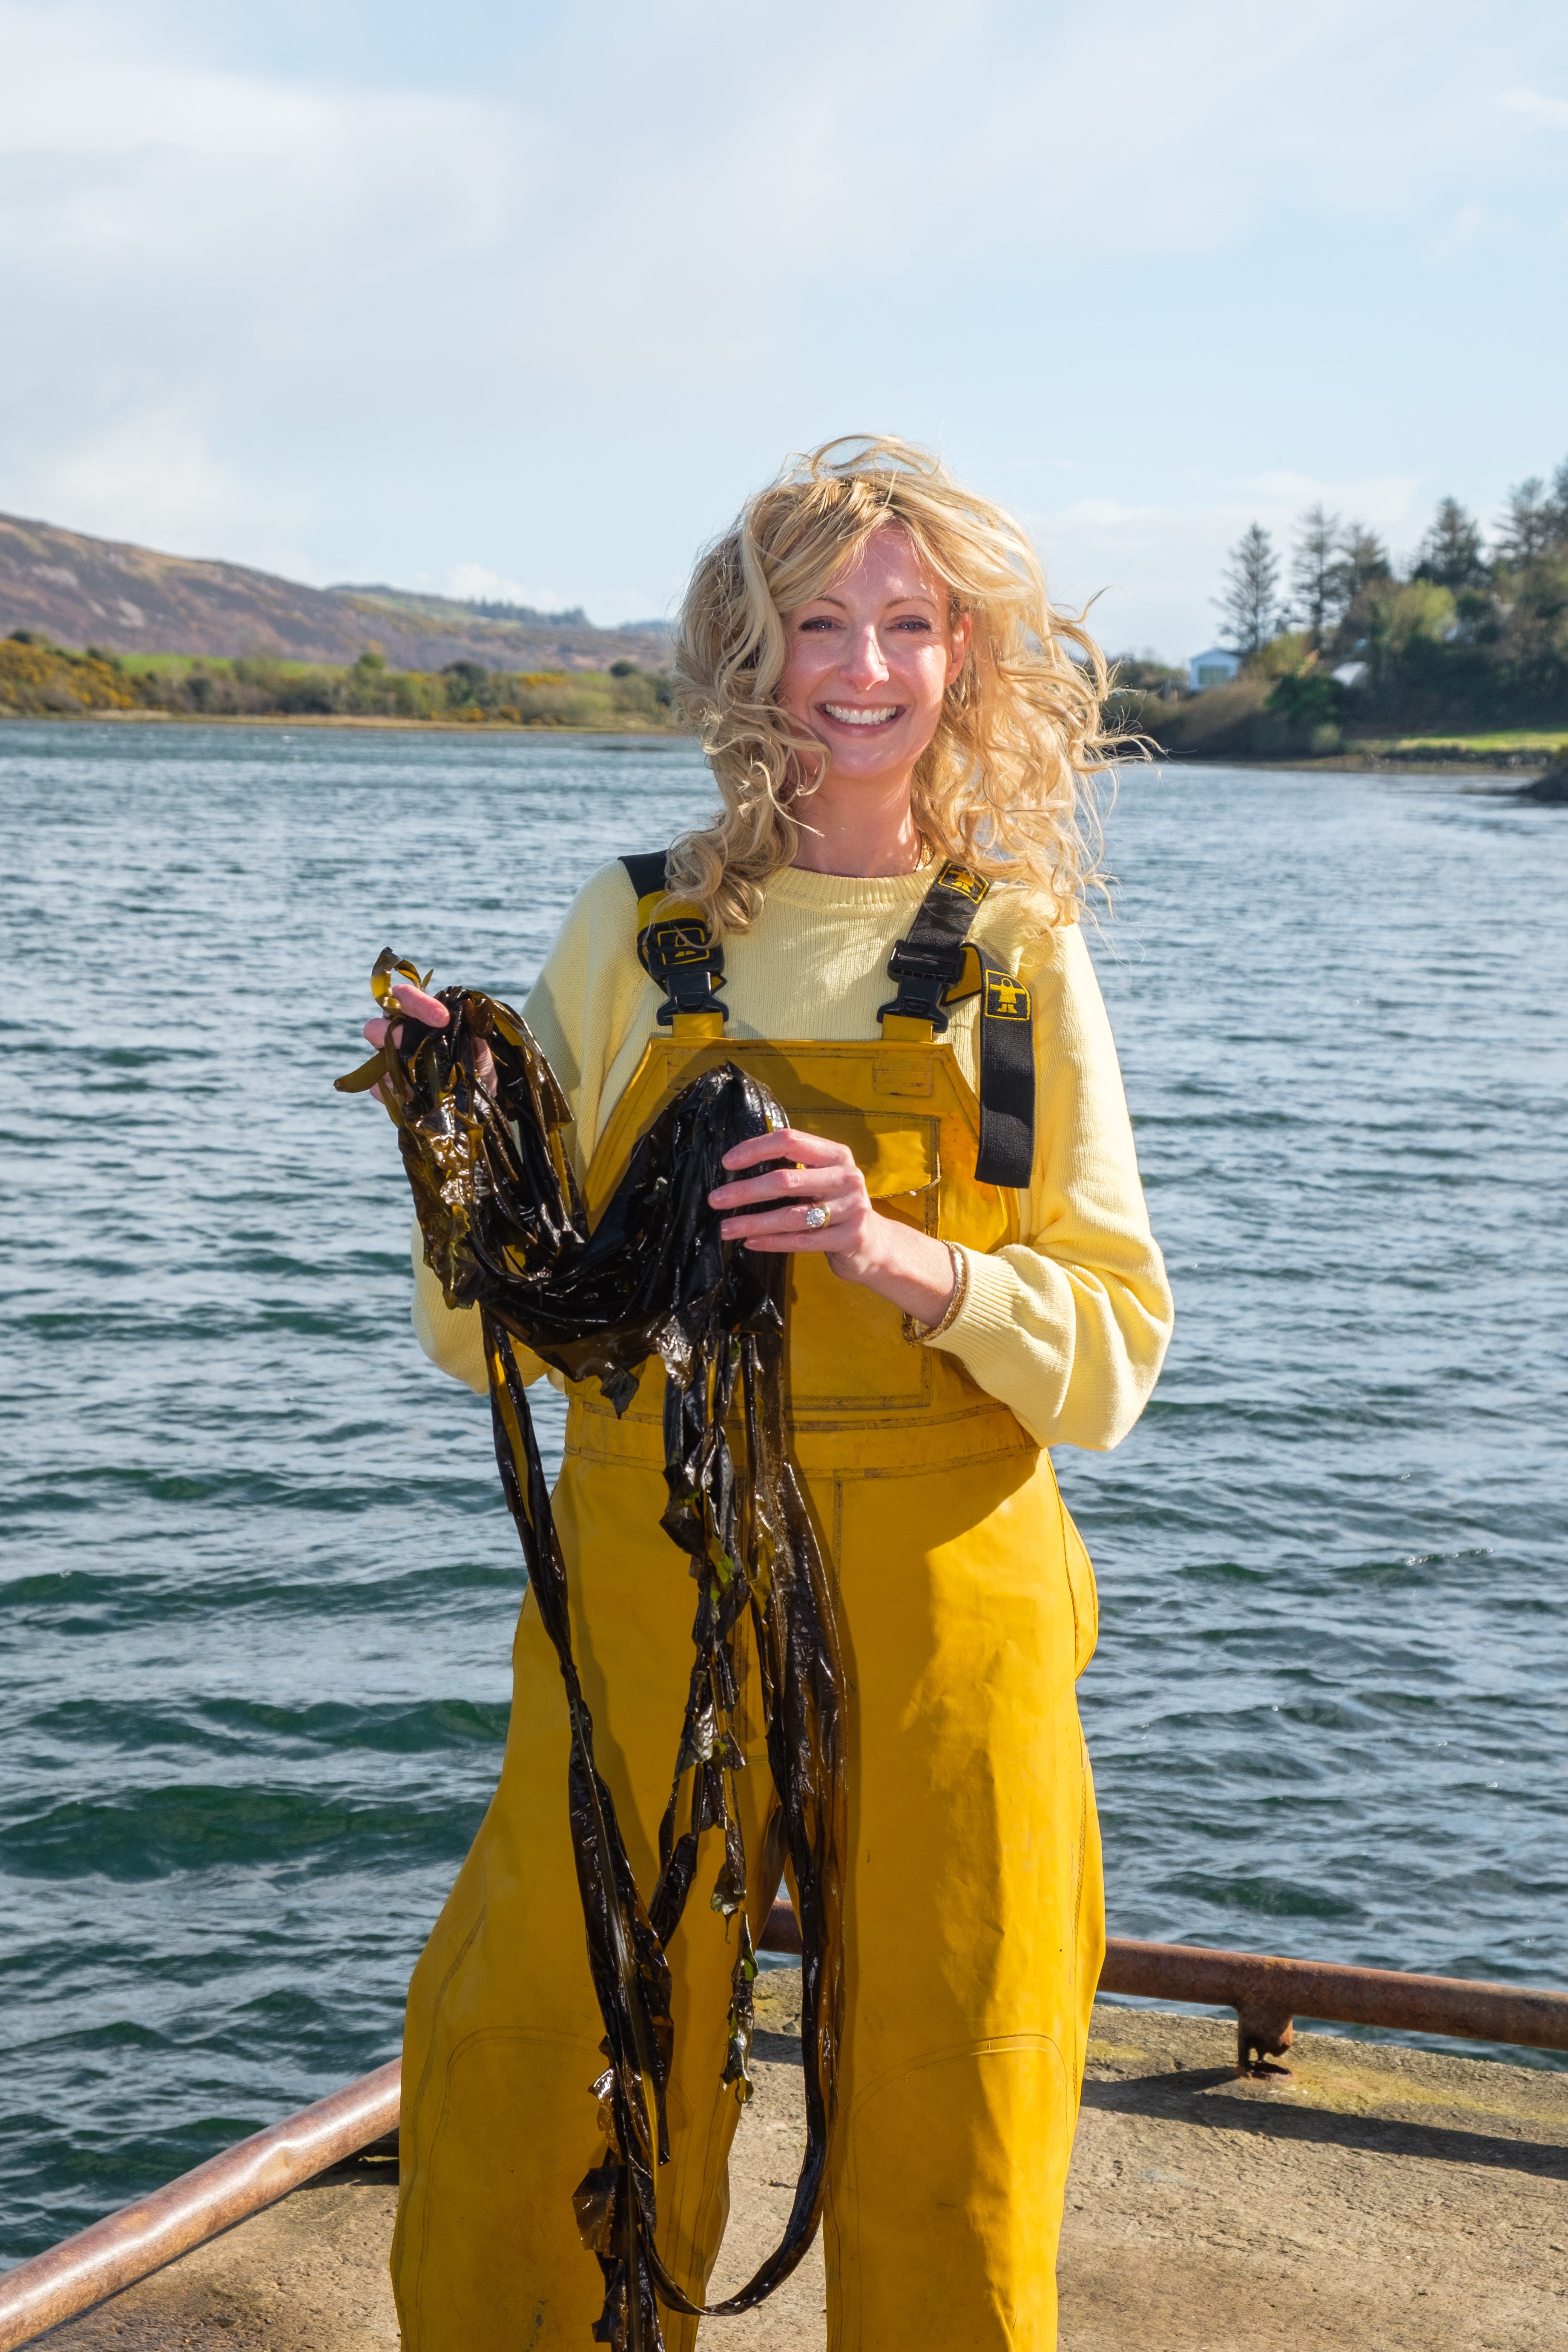 Lorraine Gallagher, Founder of The Seaweed Company. (Photographer: Loïc Wall)